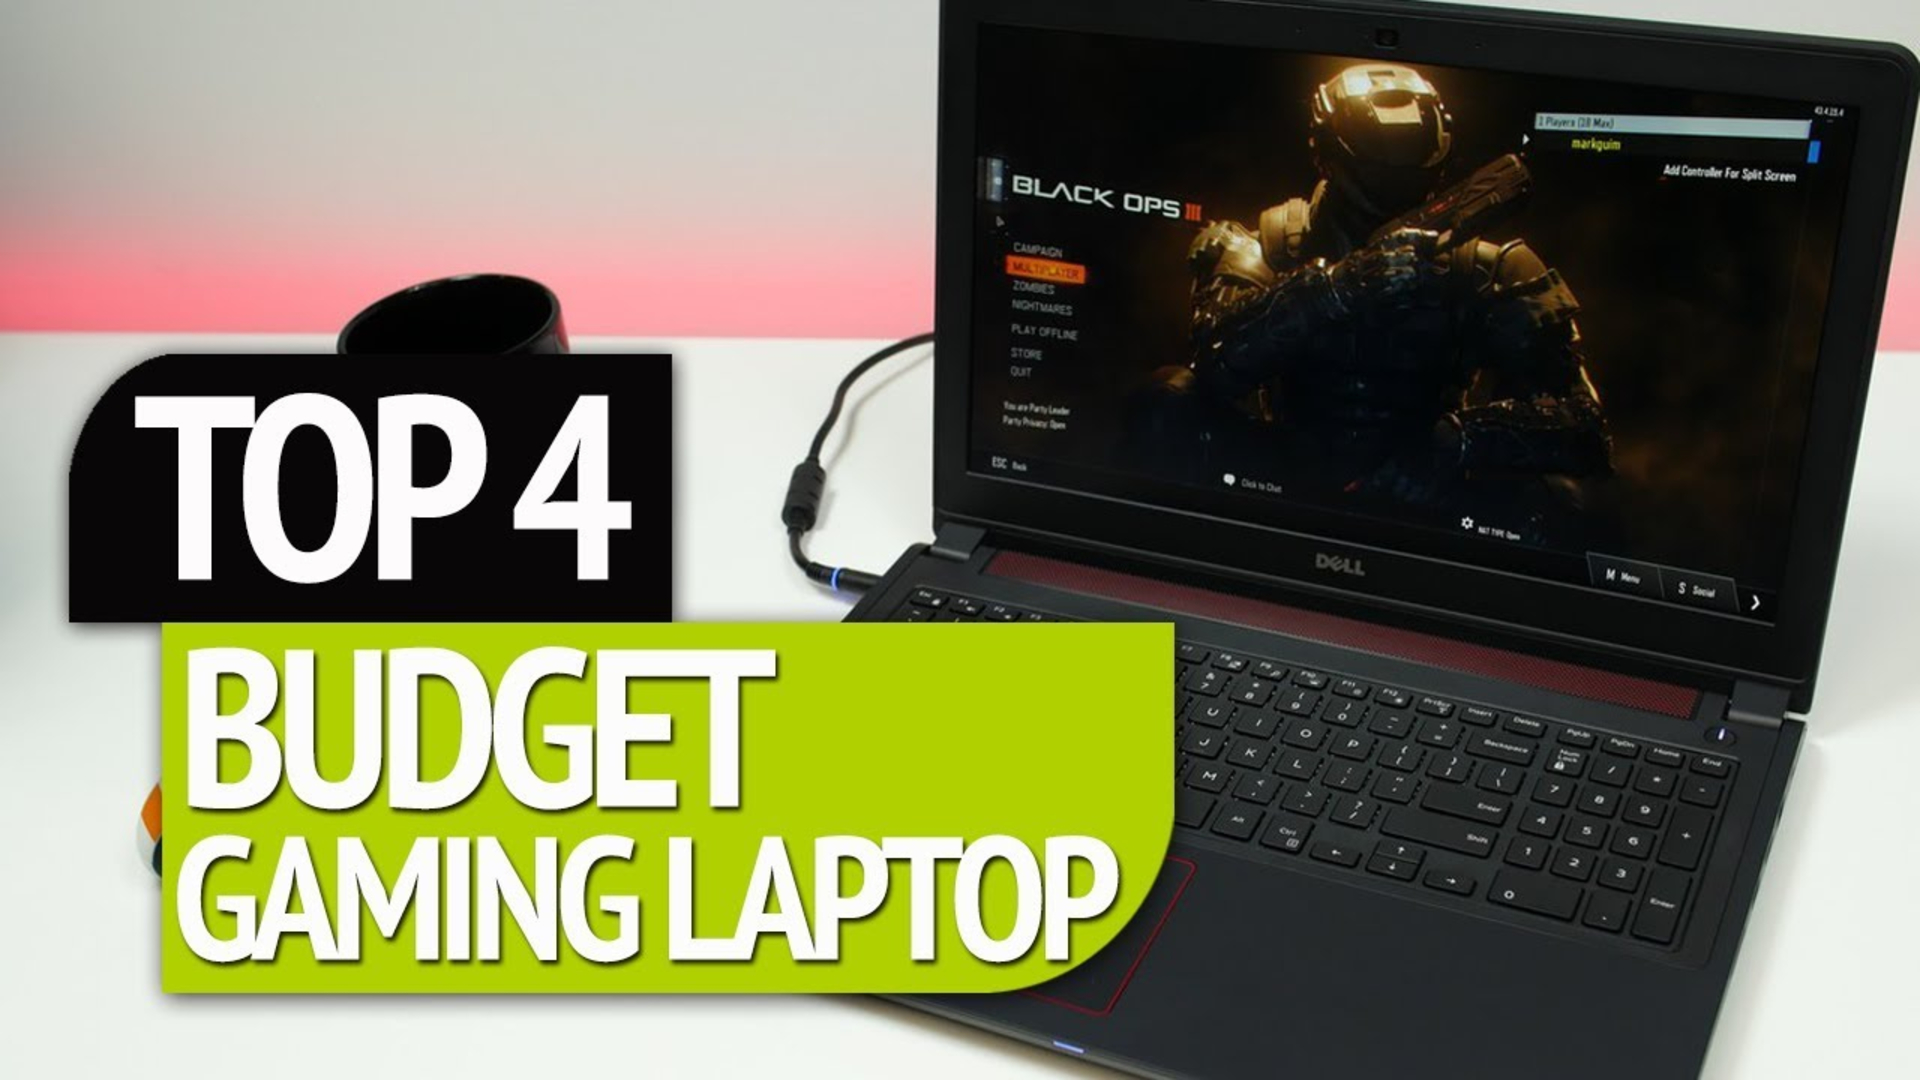 Our guide for choosing budget gaming notebooks: image